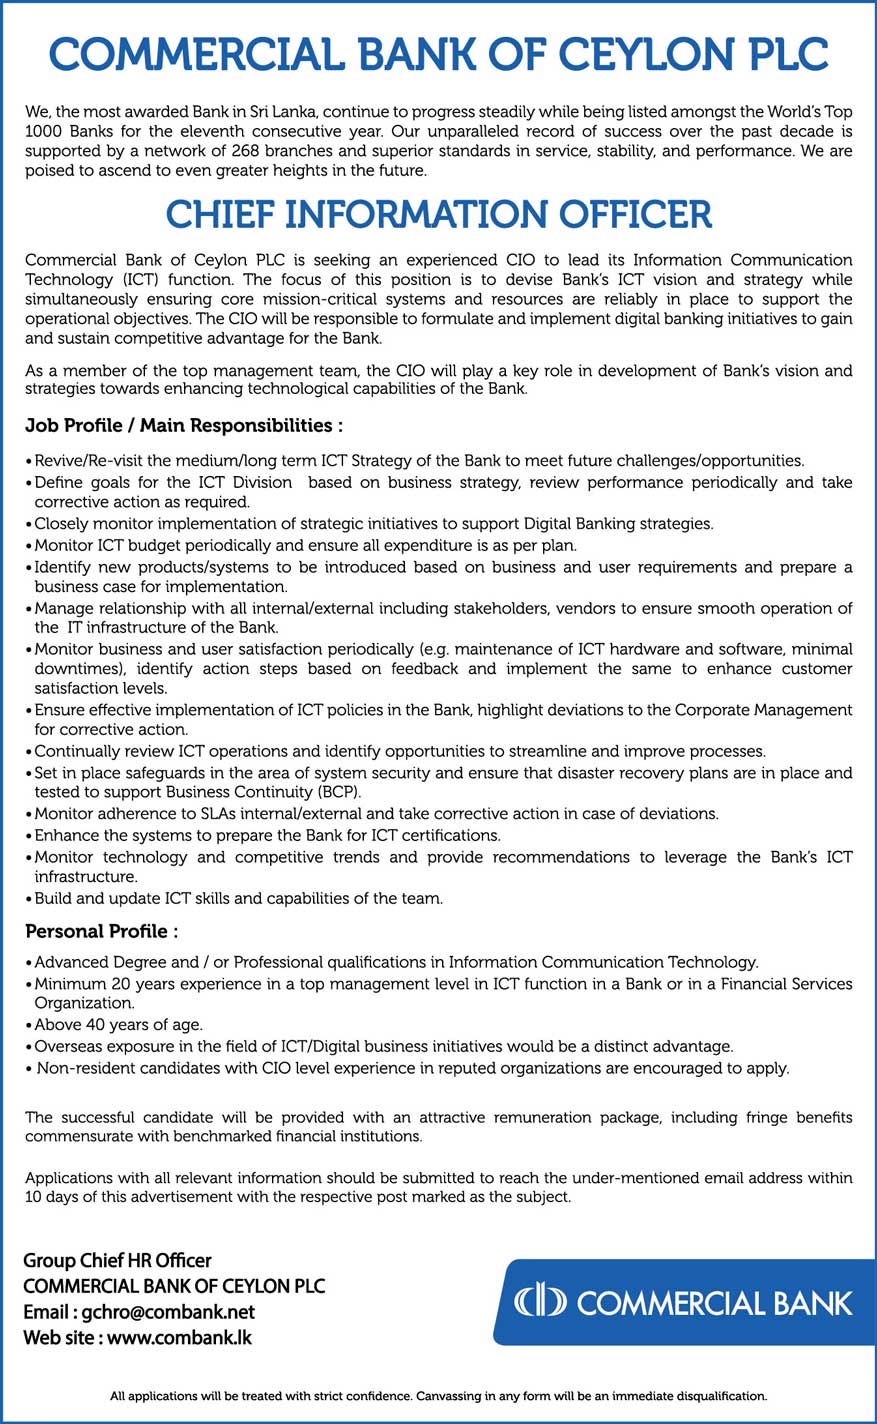 Chief Information Officer Jobs